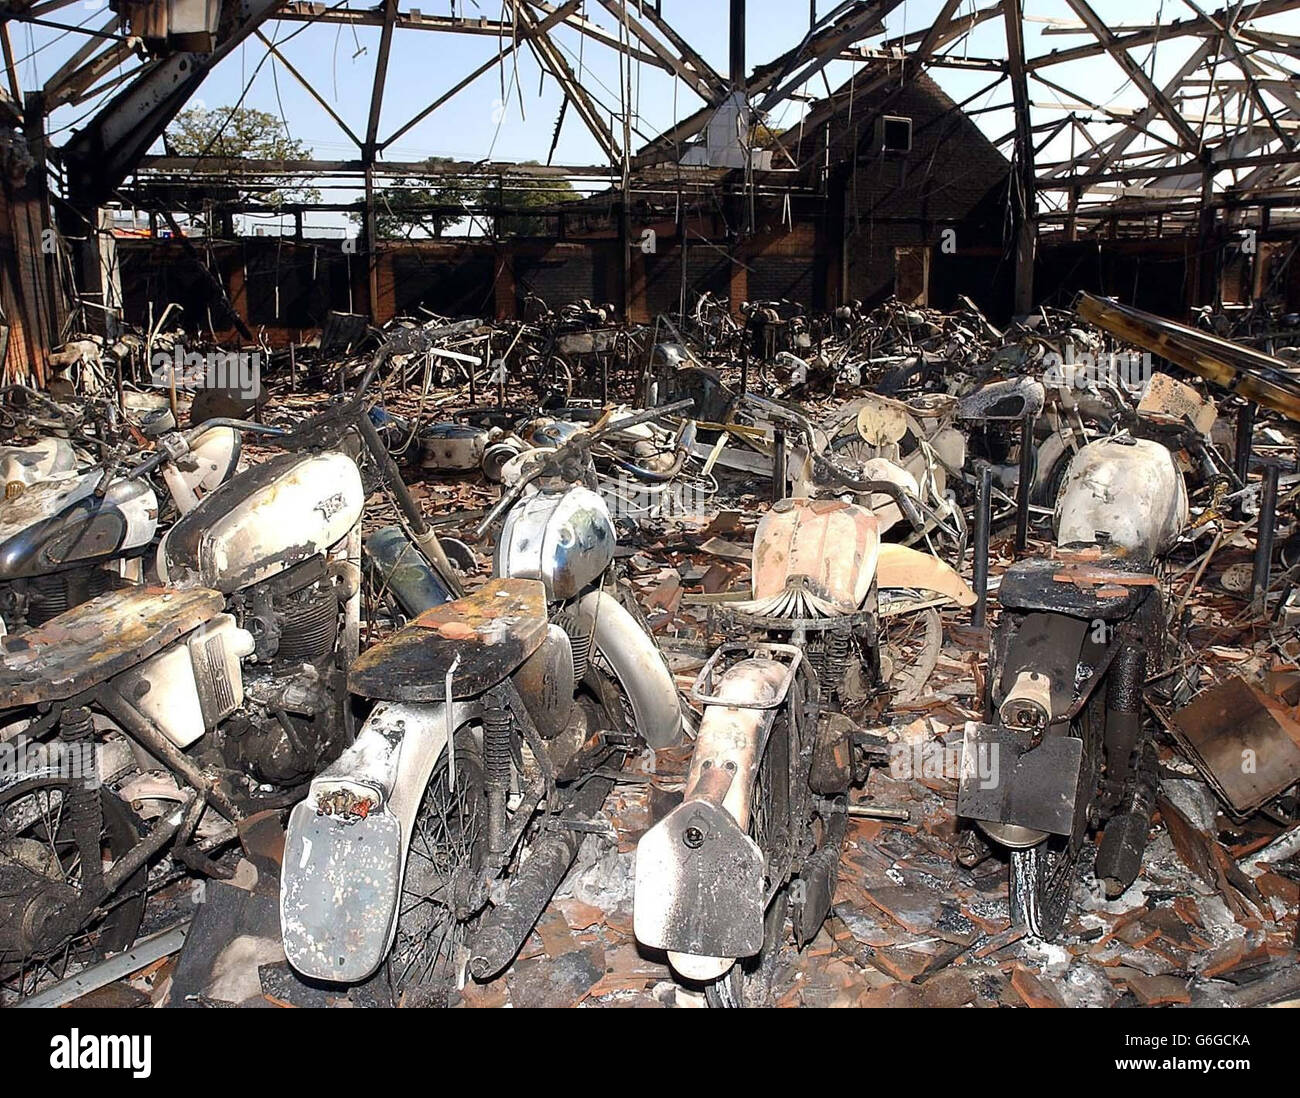 Scores of ruined classic motorbikes at the National Motorcycle Museum near Birmingham, after a fire caused by a discarded cigarette caused damage expected to total 14million. Although more than 400 of the 800 exhibits at the attraction were saved in yesterday's blaze, those lost are estimated to be worth up to 9 million. Spokesman Ken Wilson said insurers had yet to put a figure on the damage, but it was likely that replacing the gutted building would cost another 5 million. Hundreds of vintage motorbikes, many of them irreplaceable, were wiped out in the blaze. Stock Photo